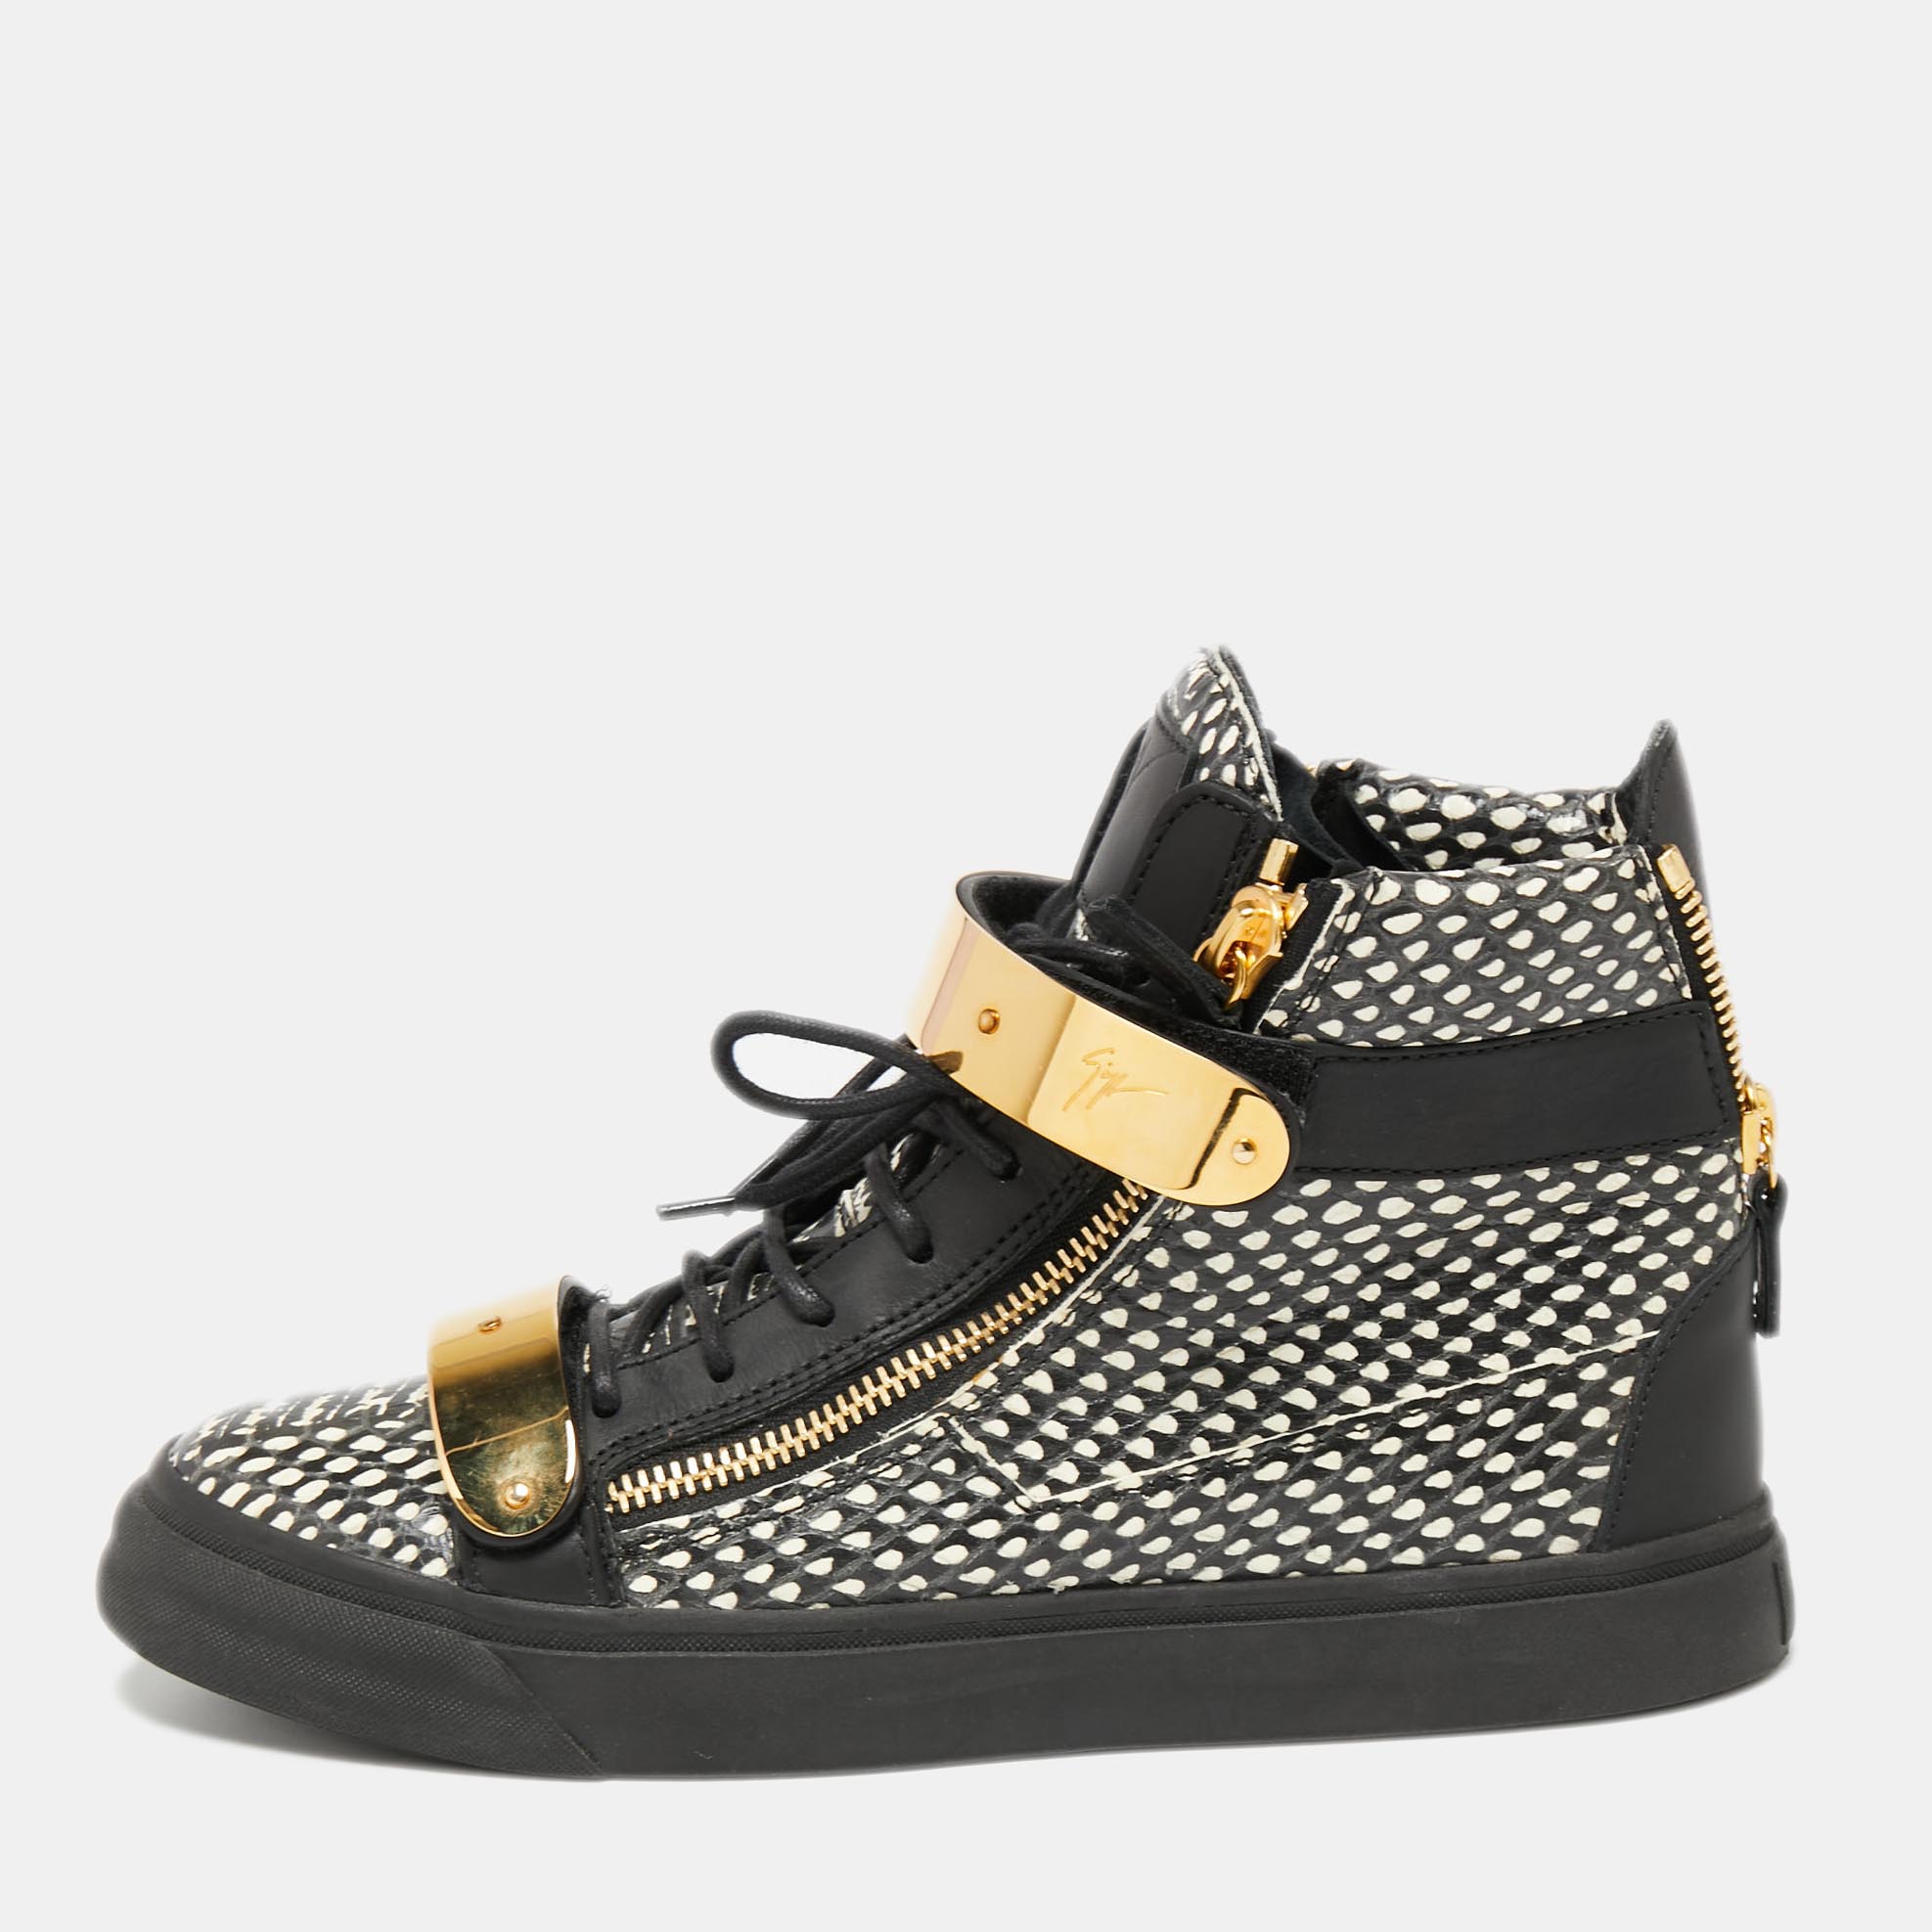 Pre-owned Giuseppe Zanotti Black/white Snakeskin Embossed And Leather High Top Double Zip Trainers Size 40